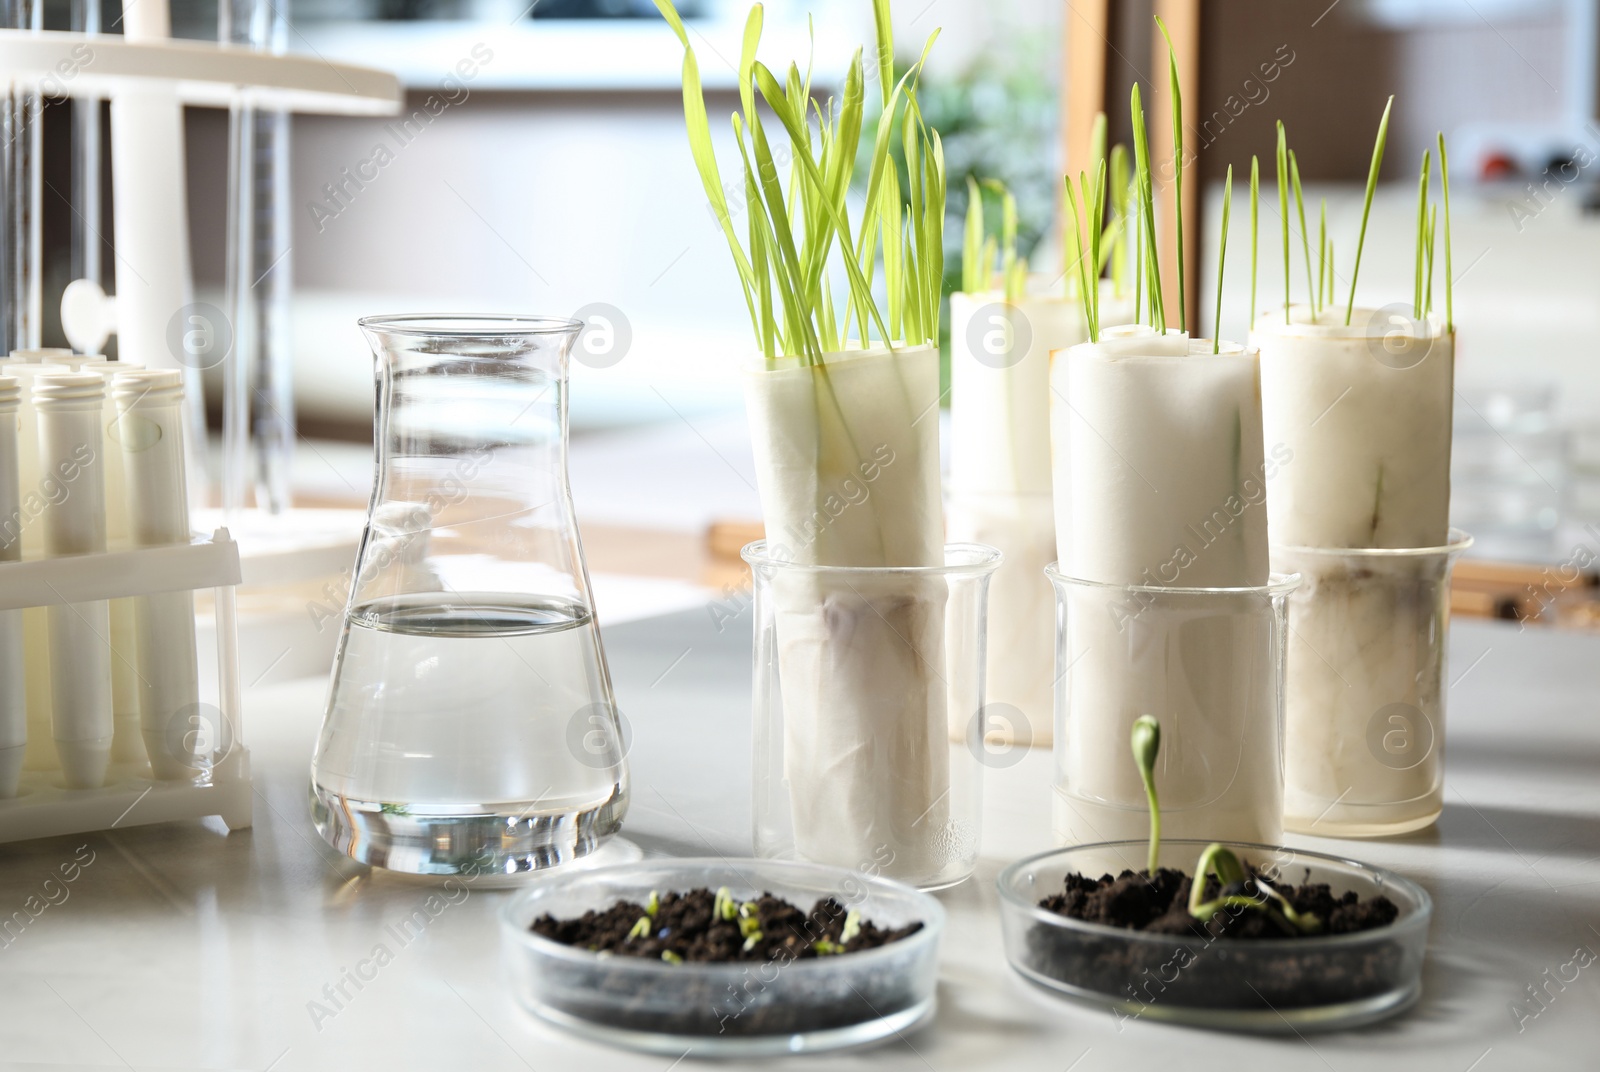 Photo of Laboratory glassware with soil and sprouts on table. Paper towel method